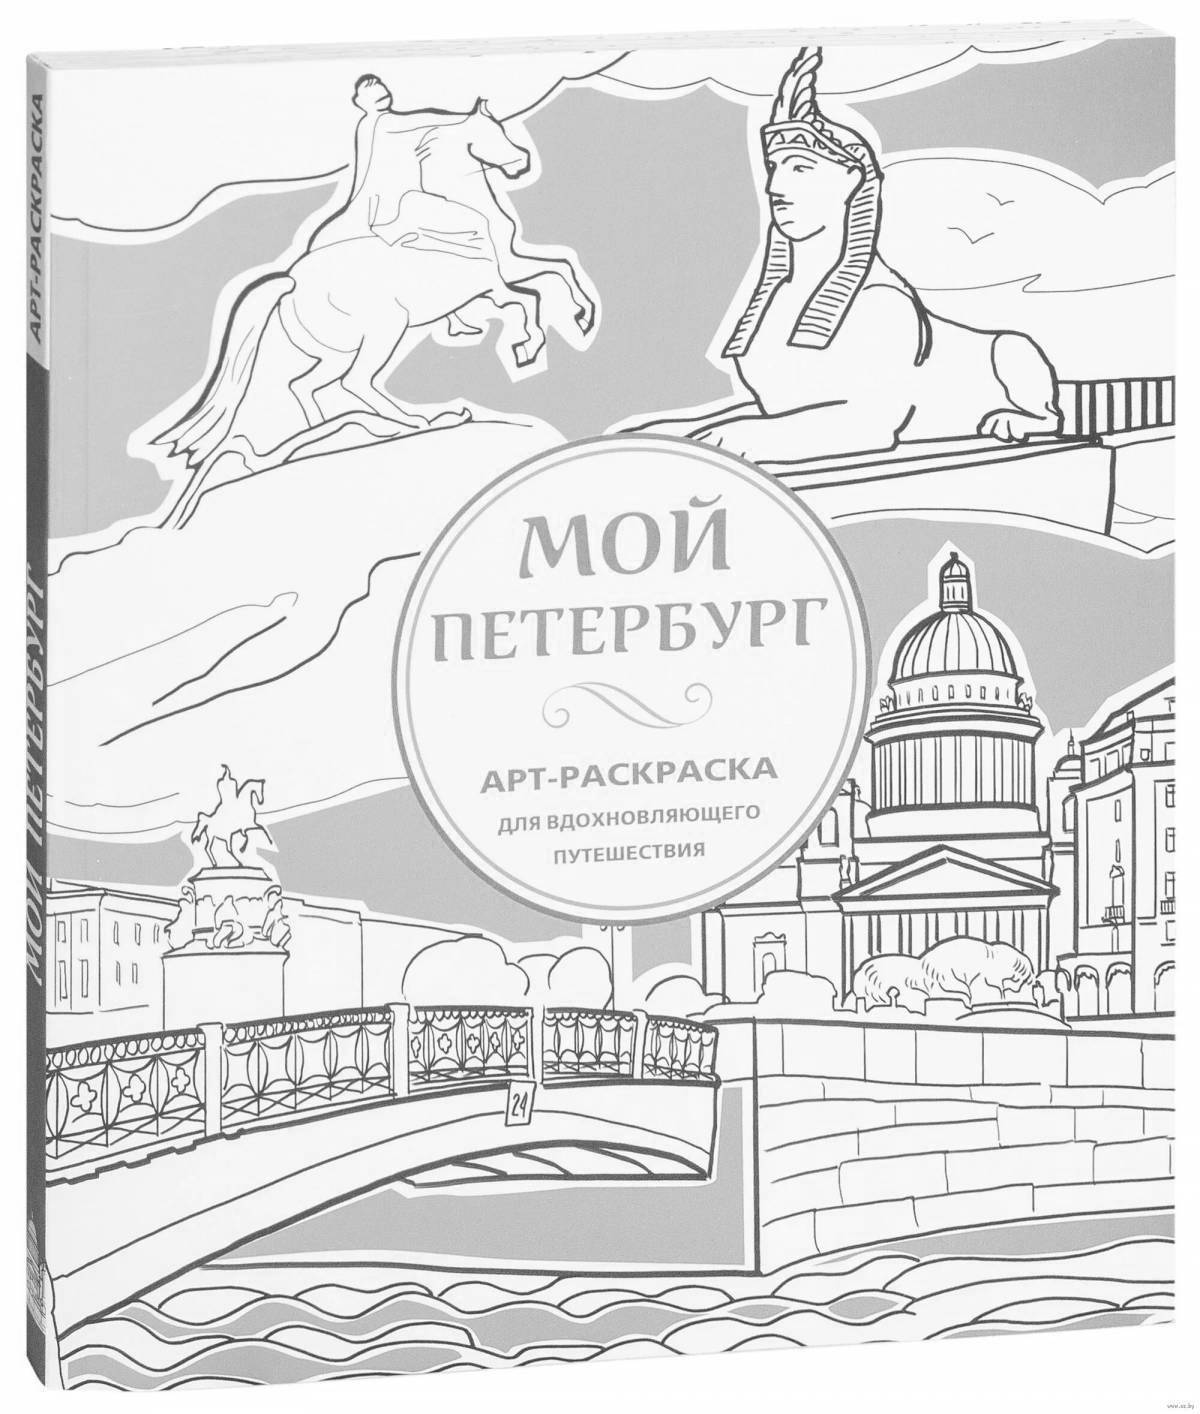 A fascinating St. Petersburg coloring book for children